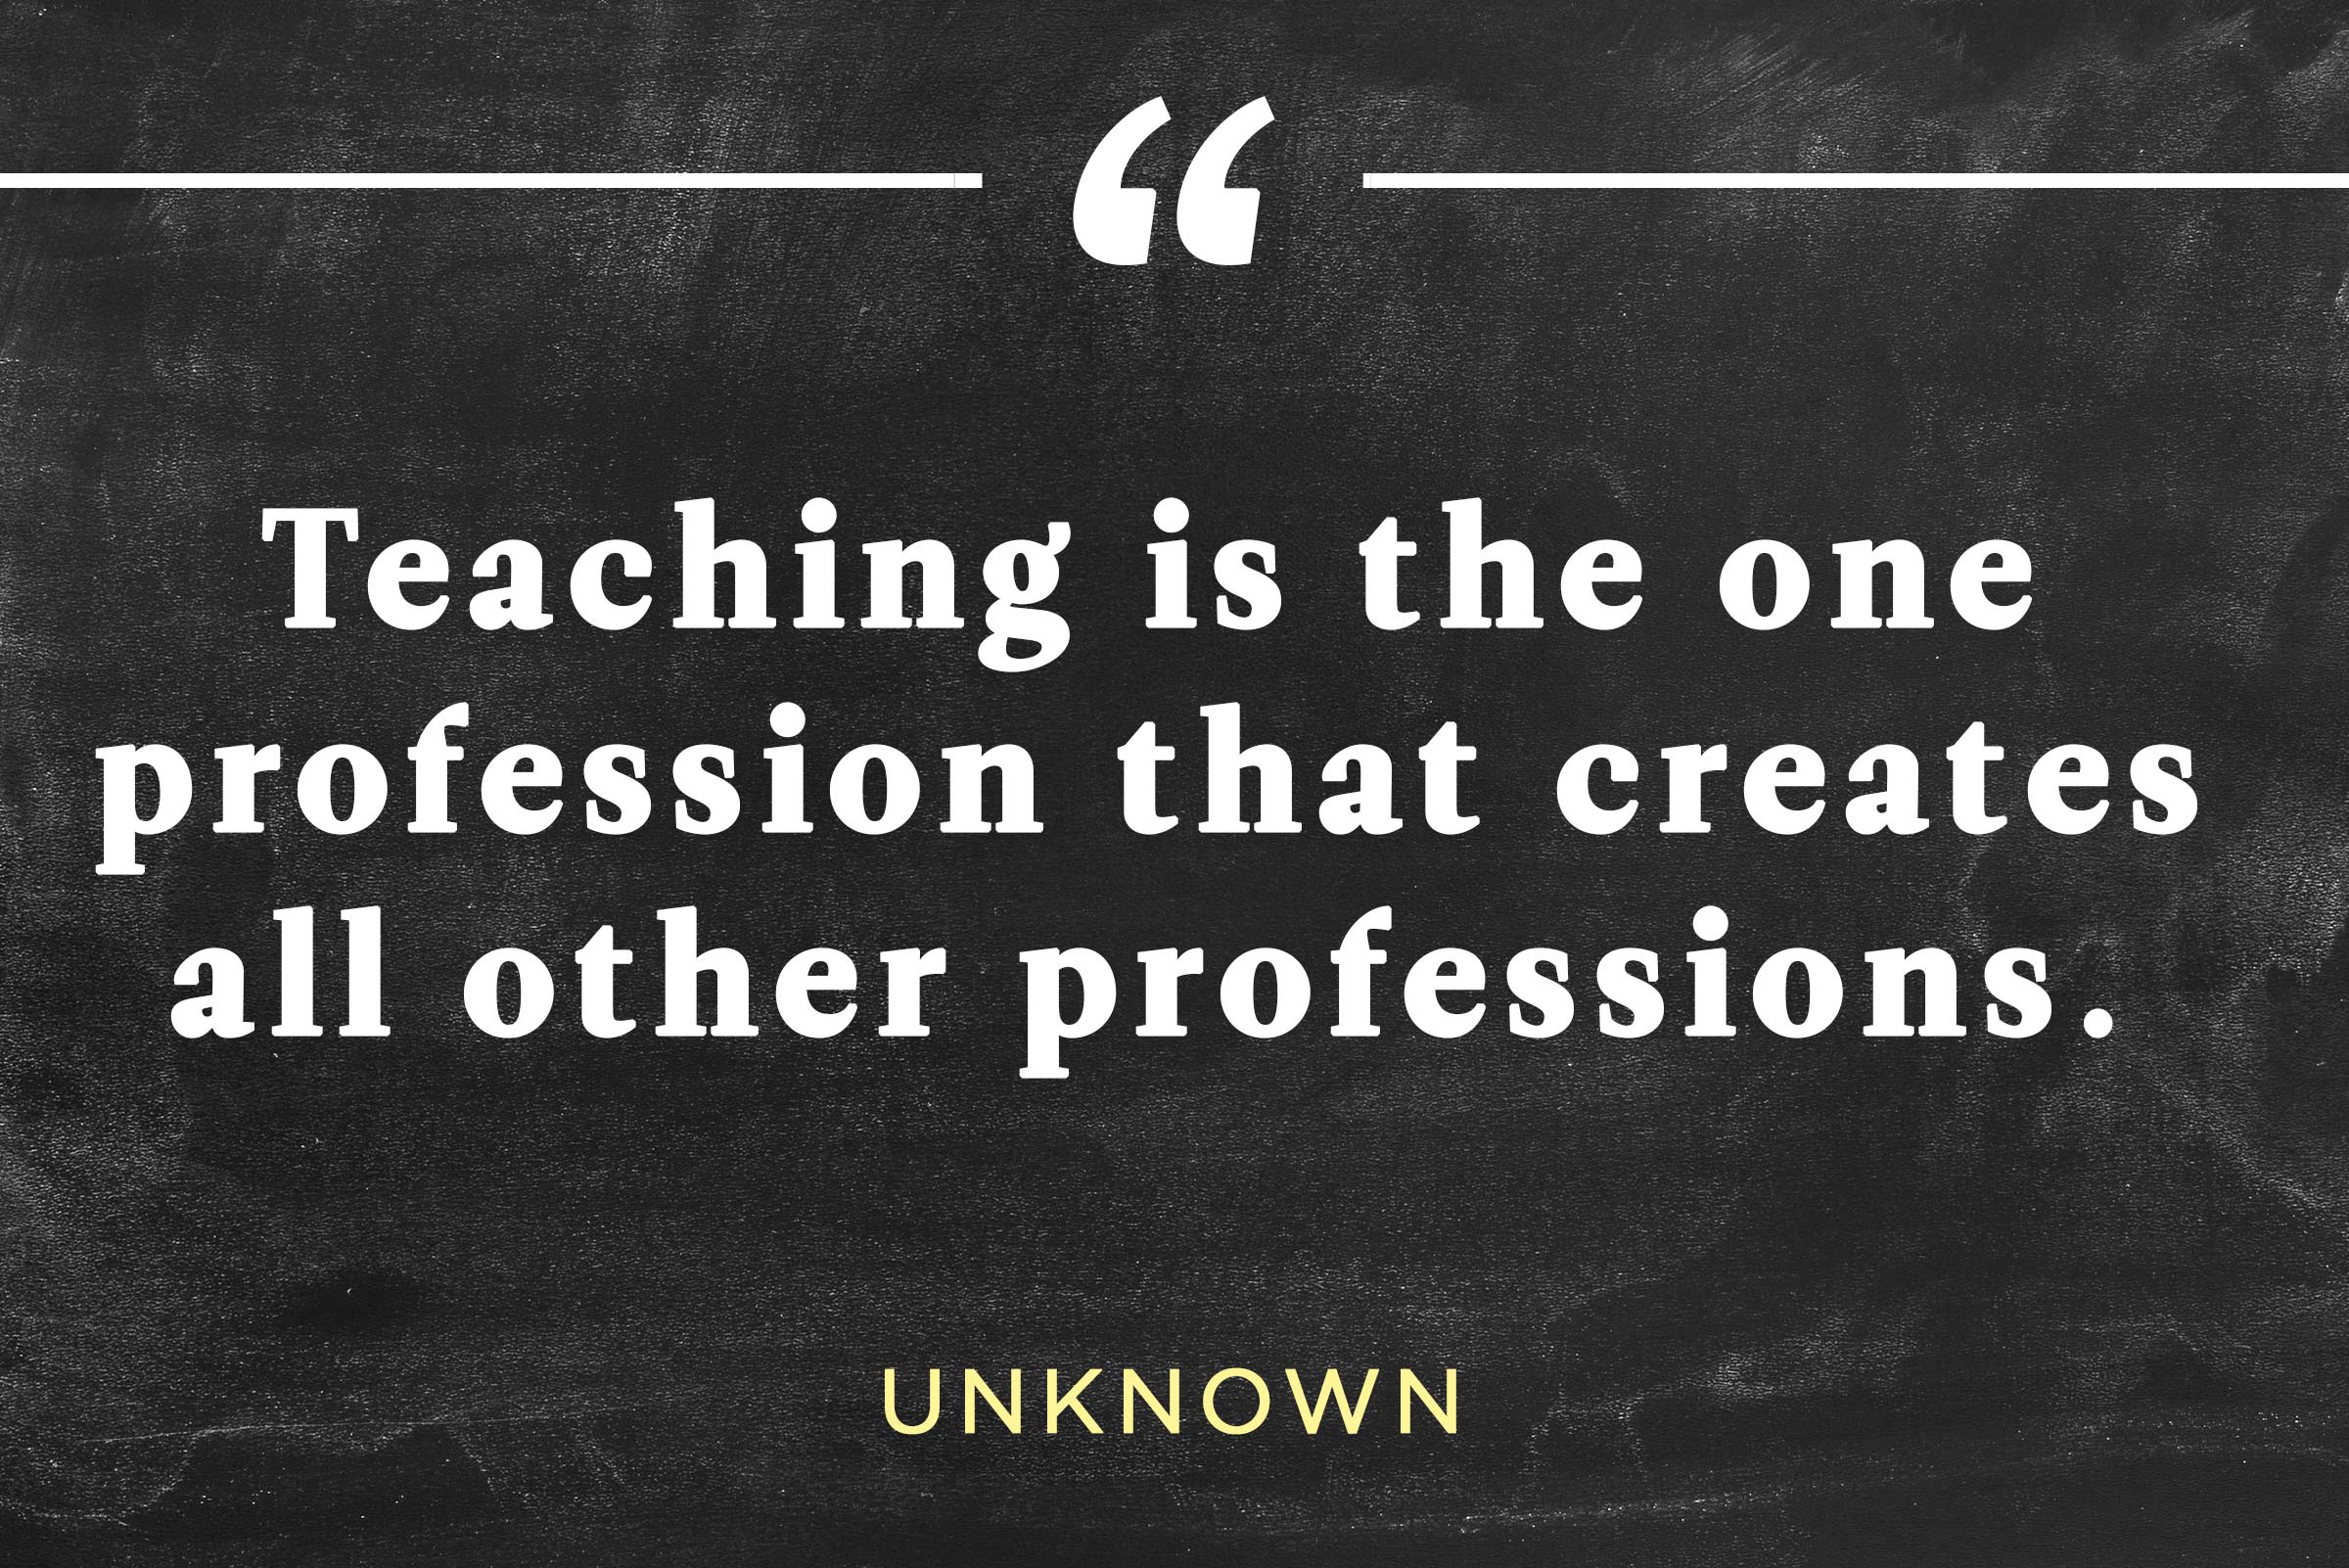 Teachig is the one profession that creates all other professions.